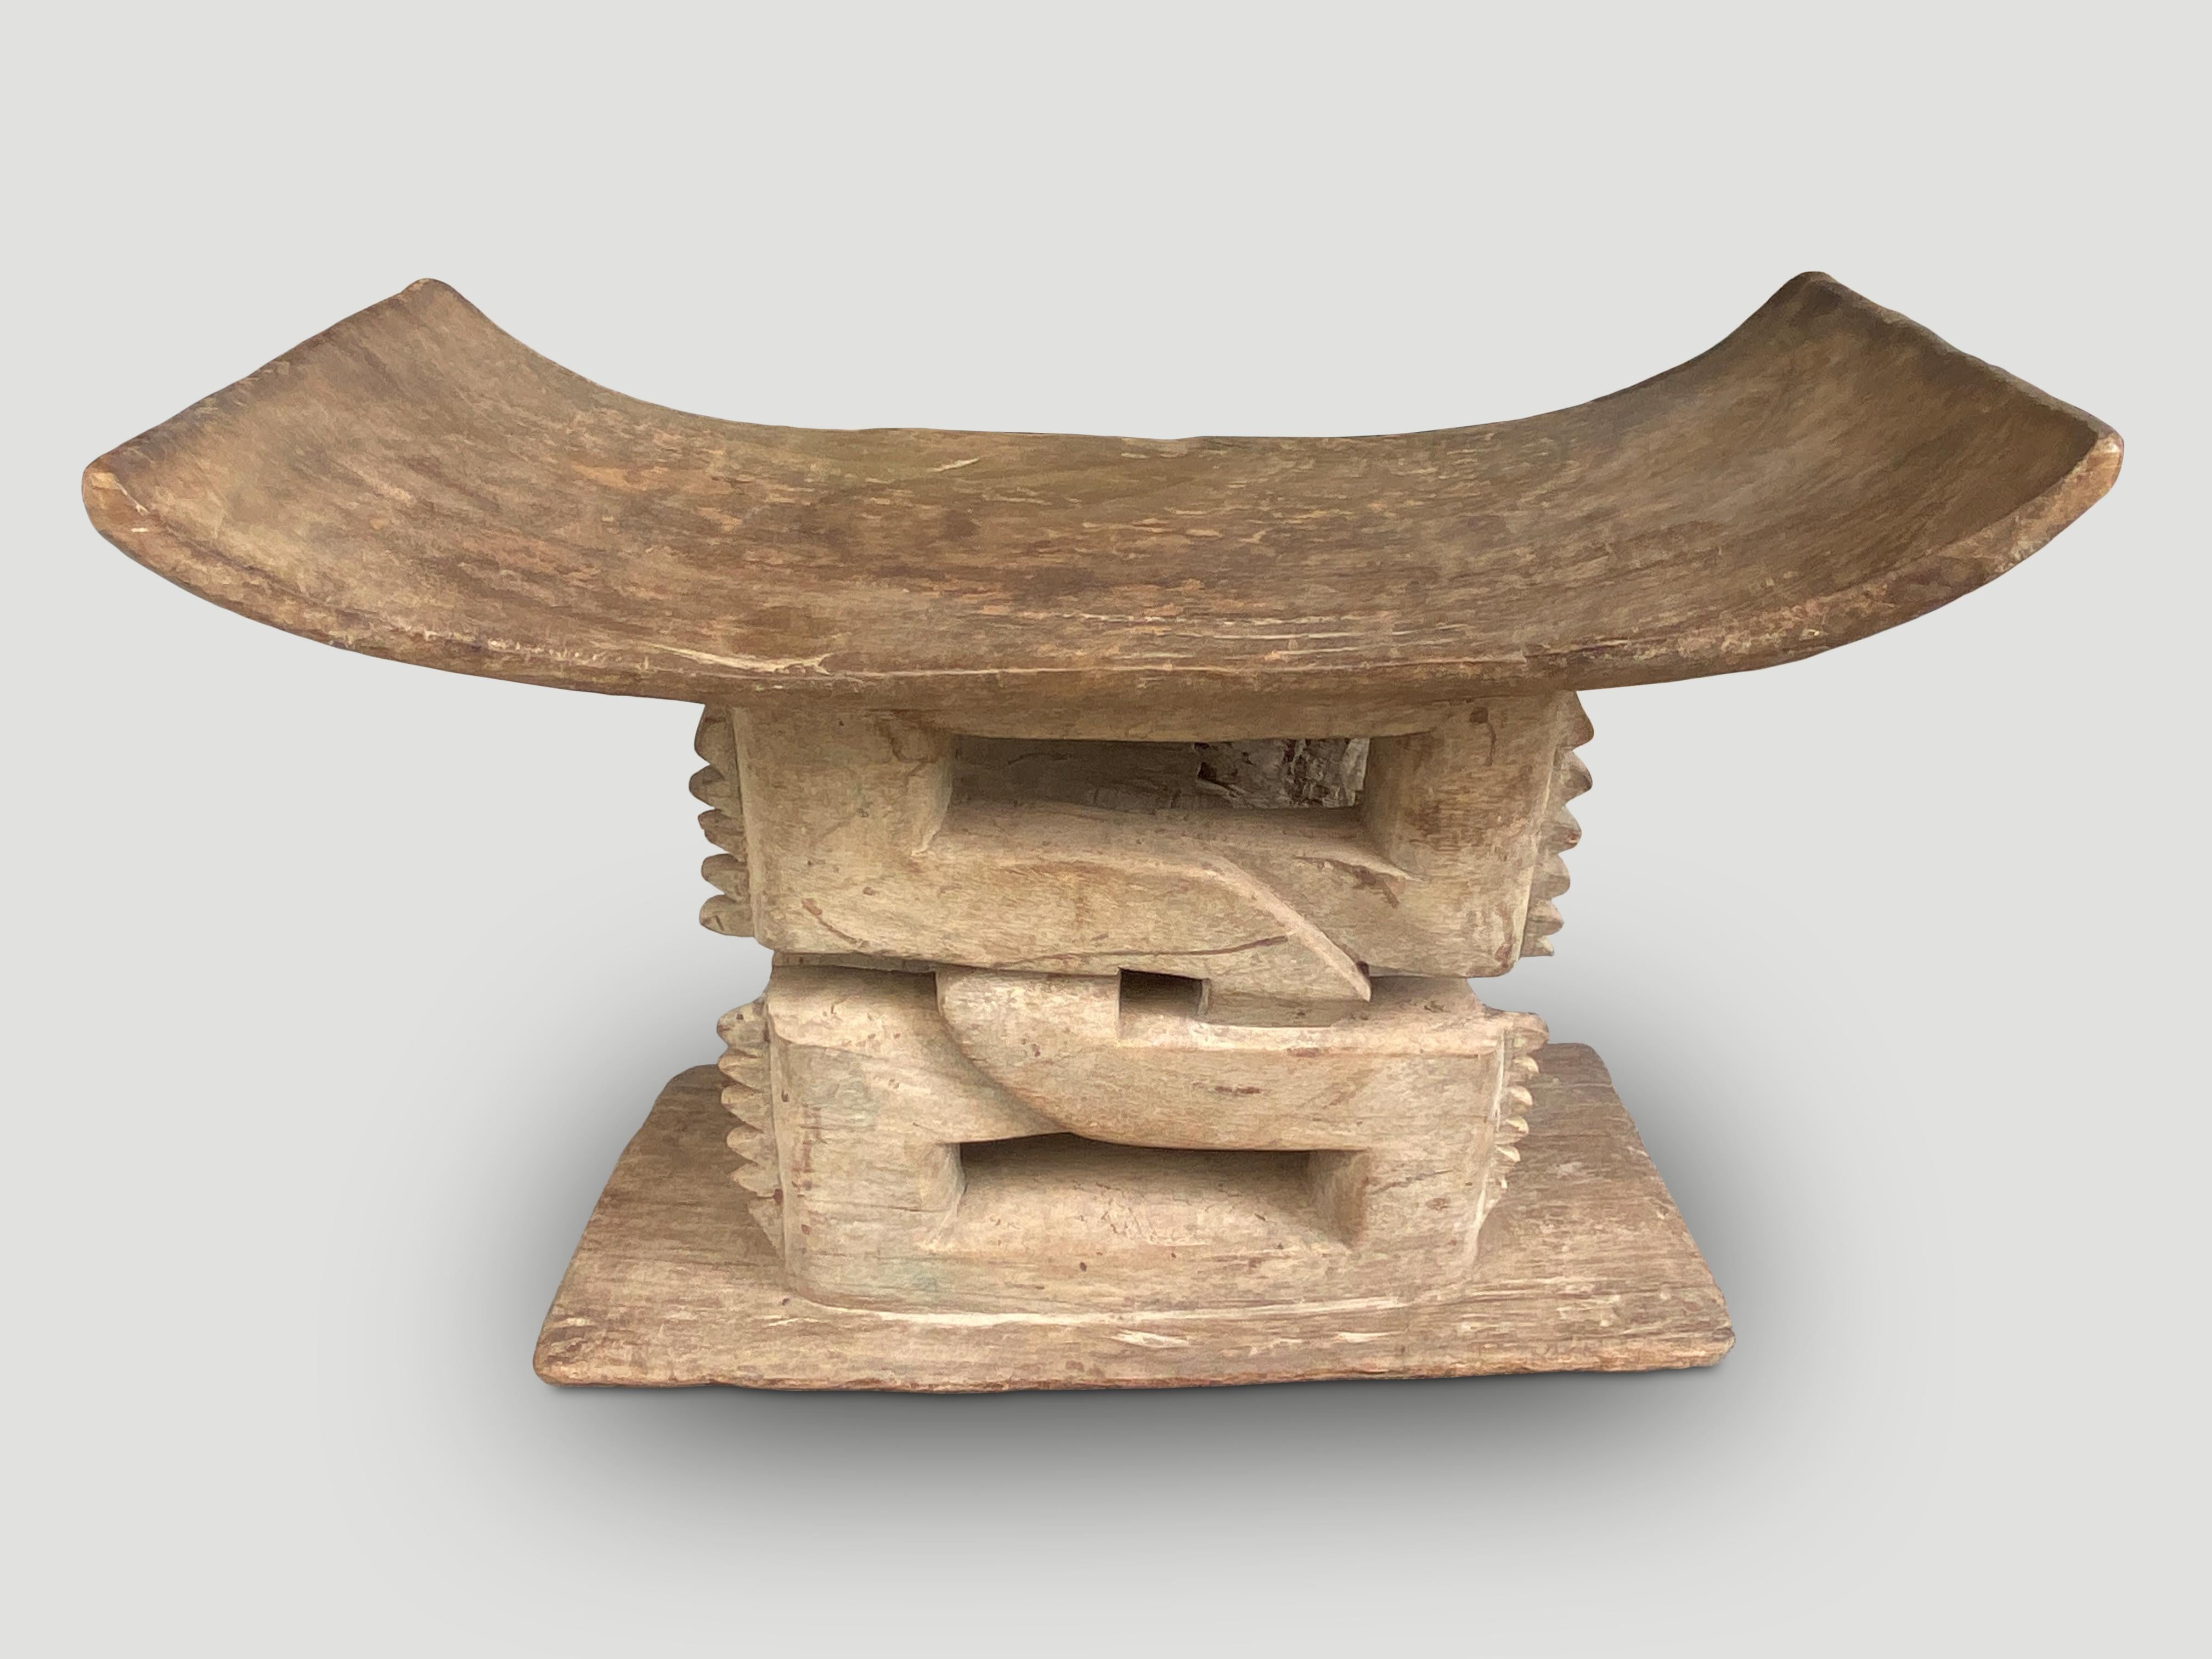 Beautiful detailing on this Ashanti stool hand carved from a single piece of wood. These were originally given as gifts upon marriage and passed from father to son with different designs and meanings. Circa early 20th Century. We only source the